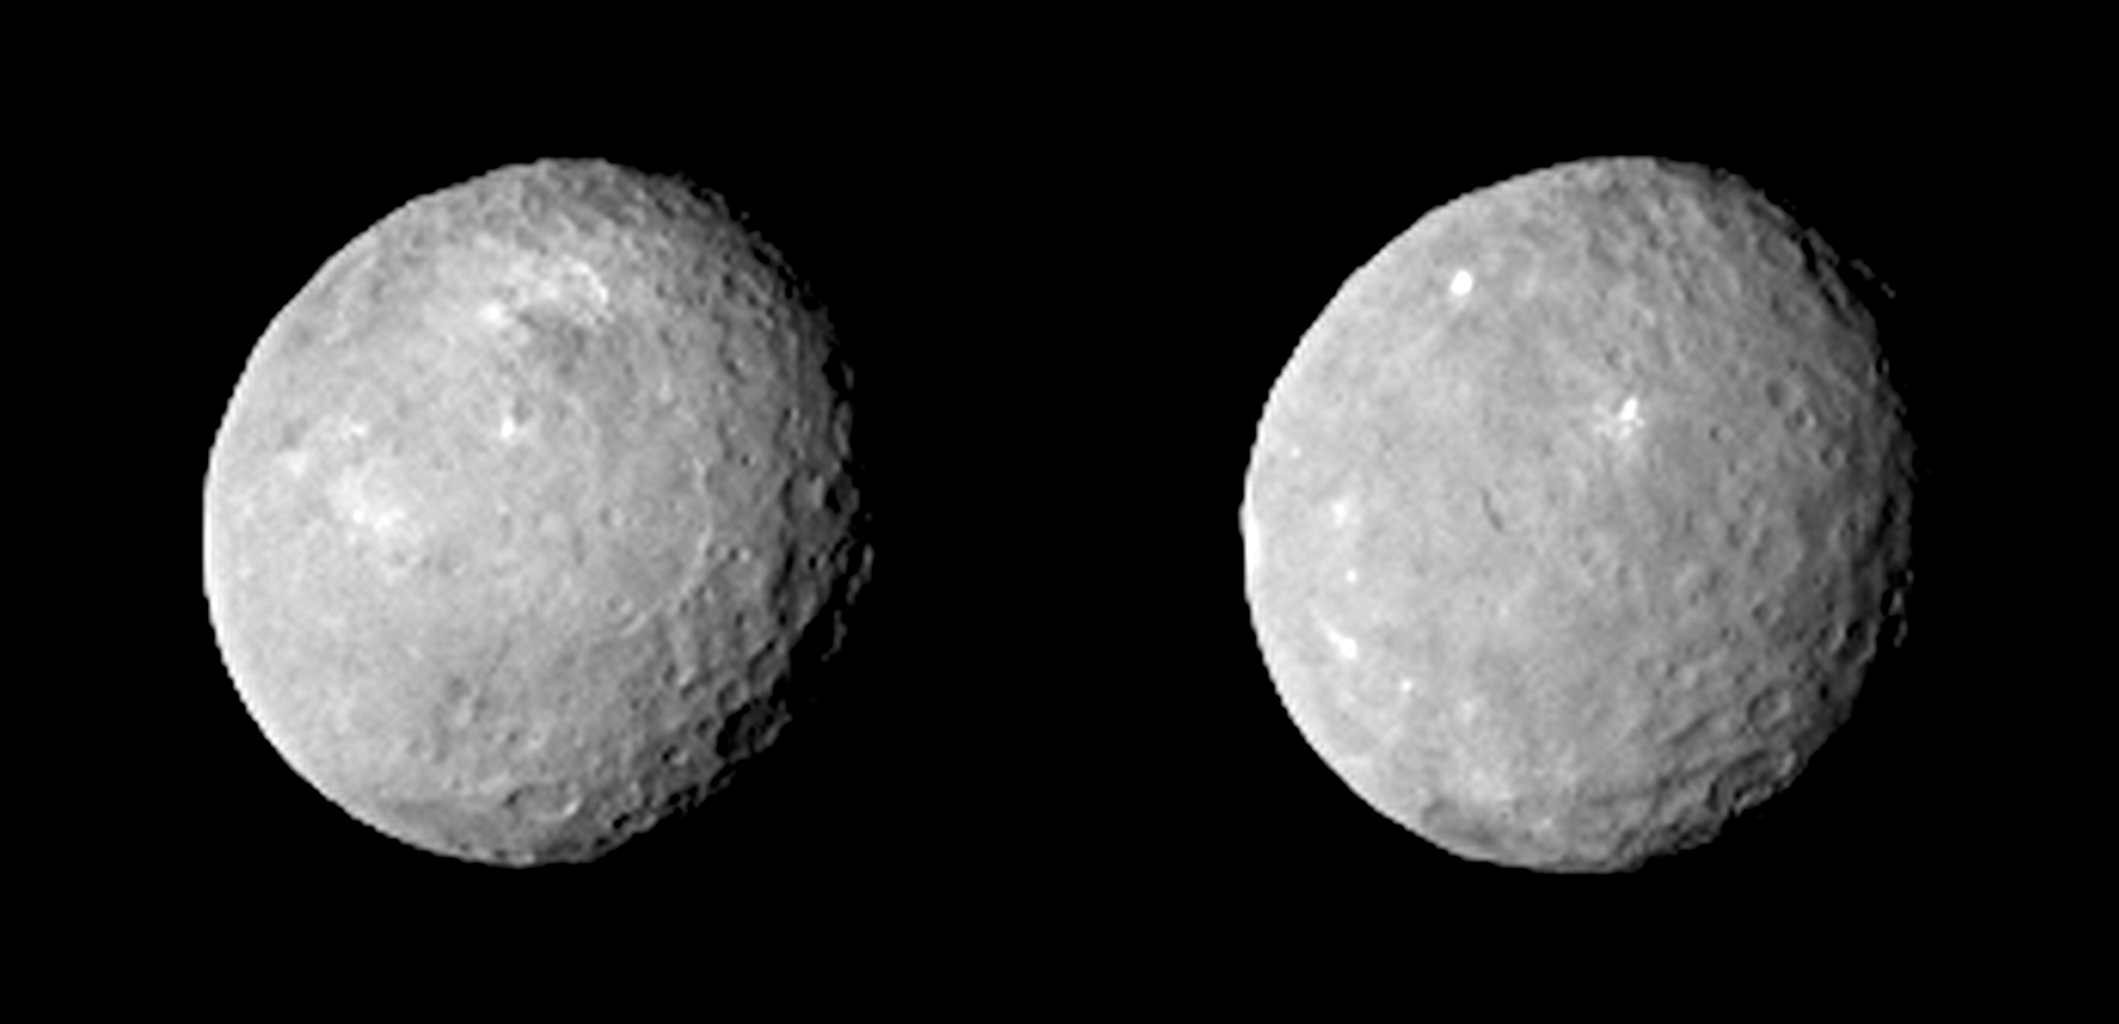 Dawn Approaches: Two Faces of Ceres